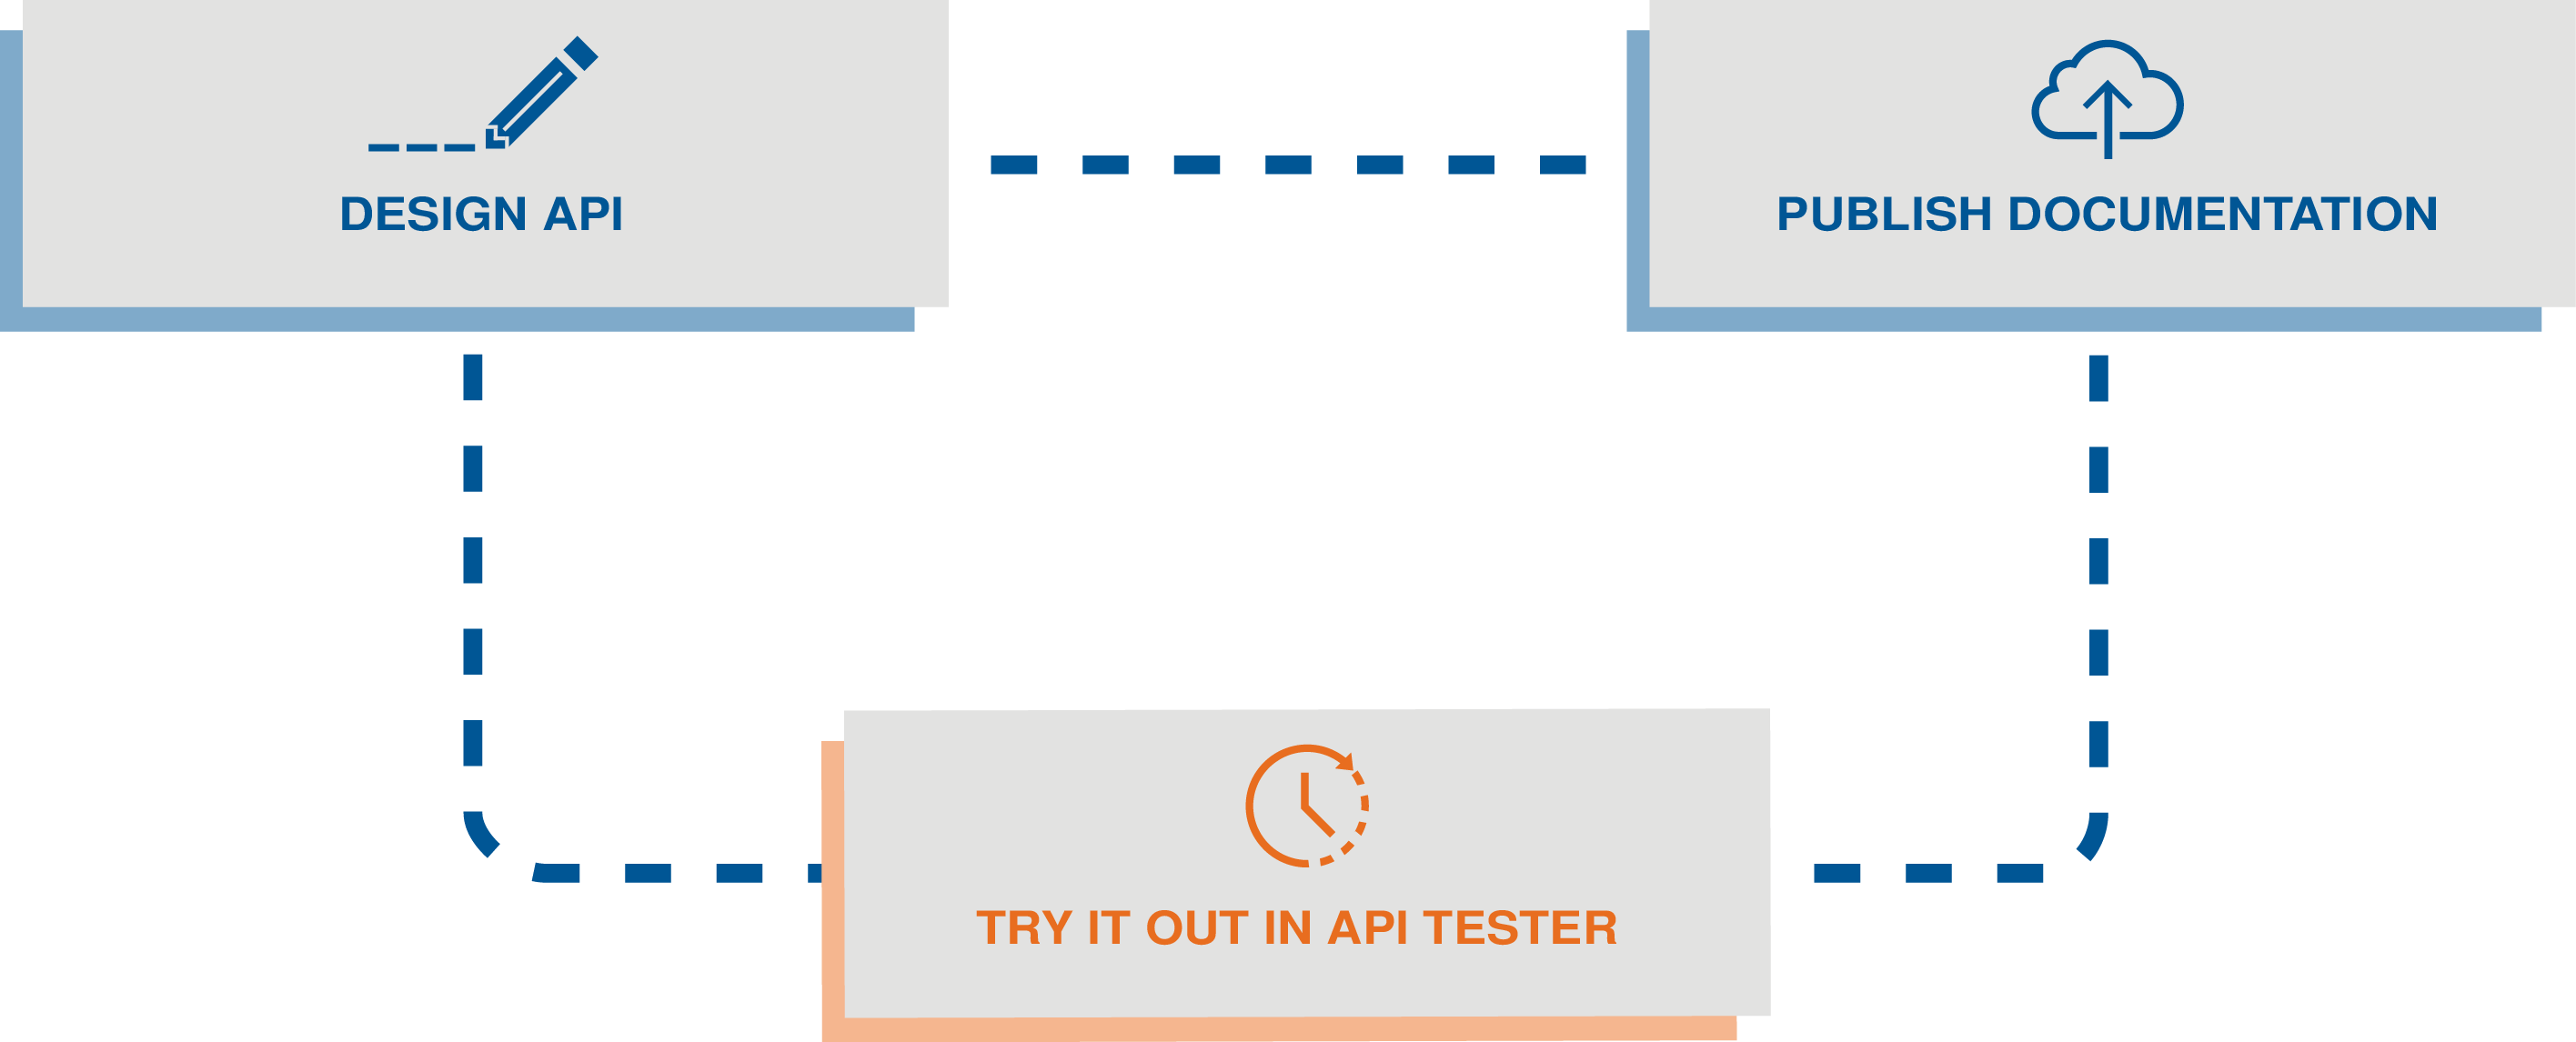 You start by designing an API, then you try it in Talend Cloud API Tester, then you publish the API documentation.